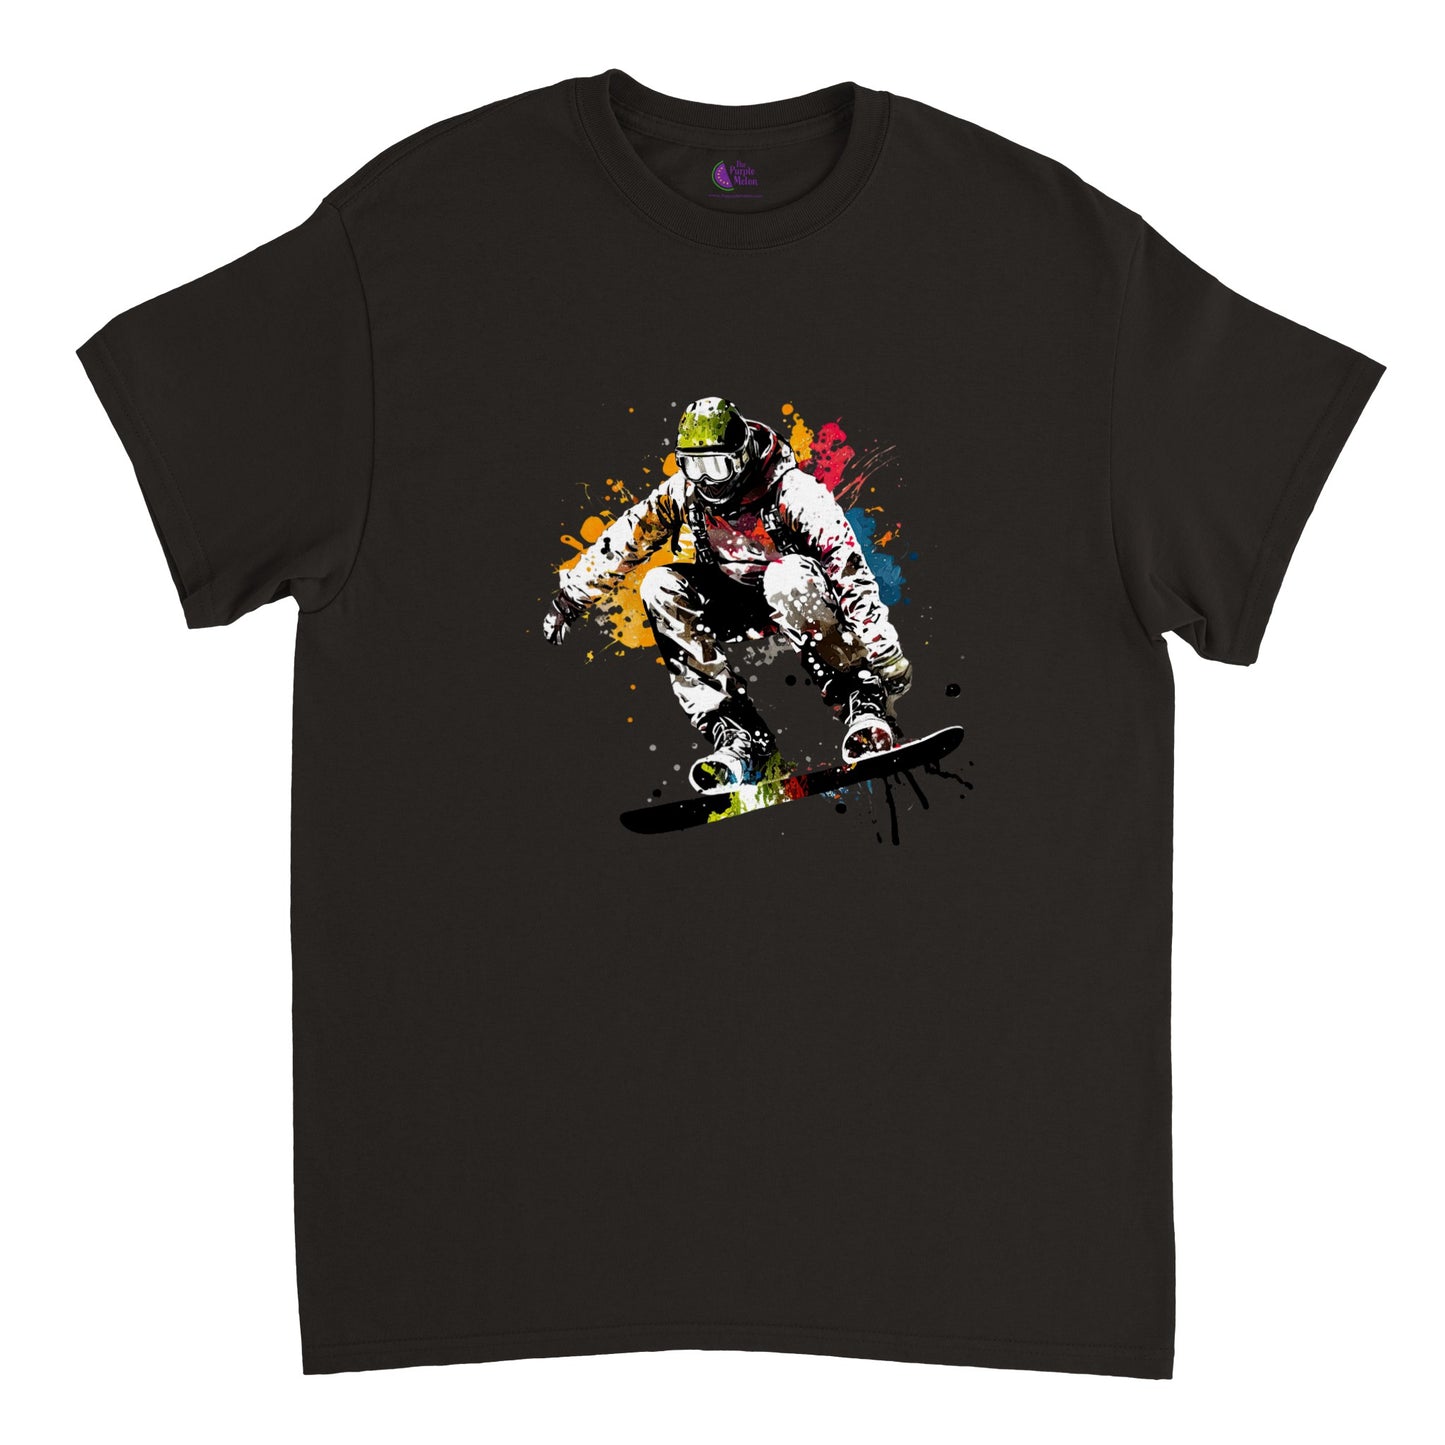 Black t-shirt with a snowboarder print